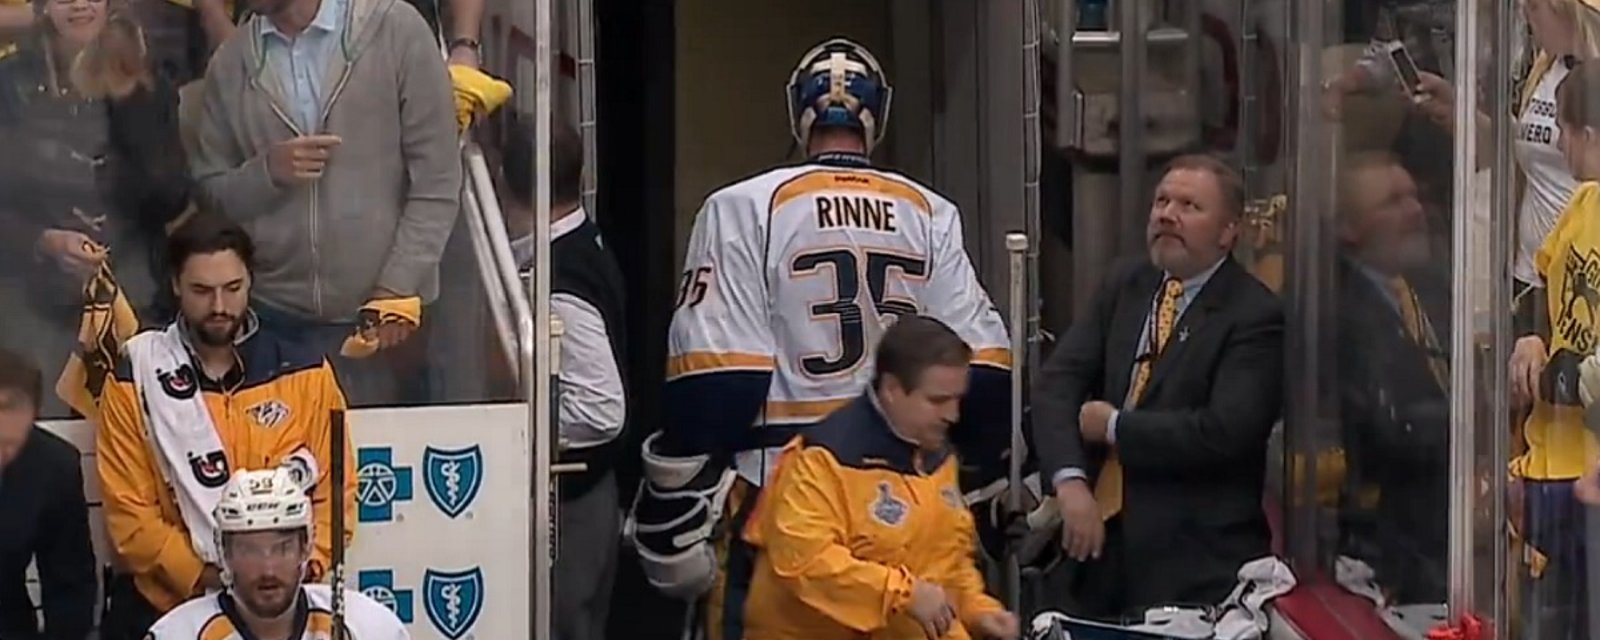 Rinne chased all the way to the locker room after 2 goals in 15 seconds!